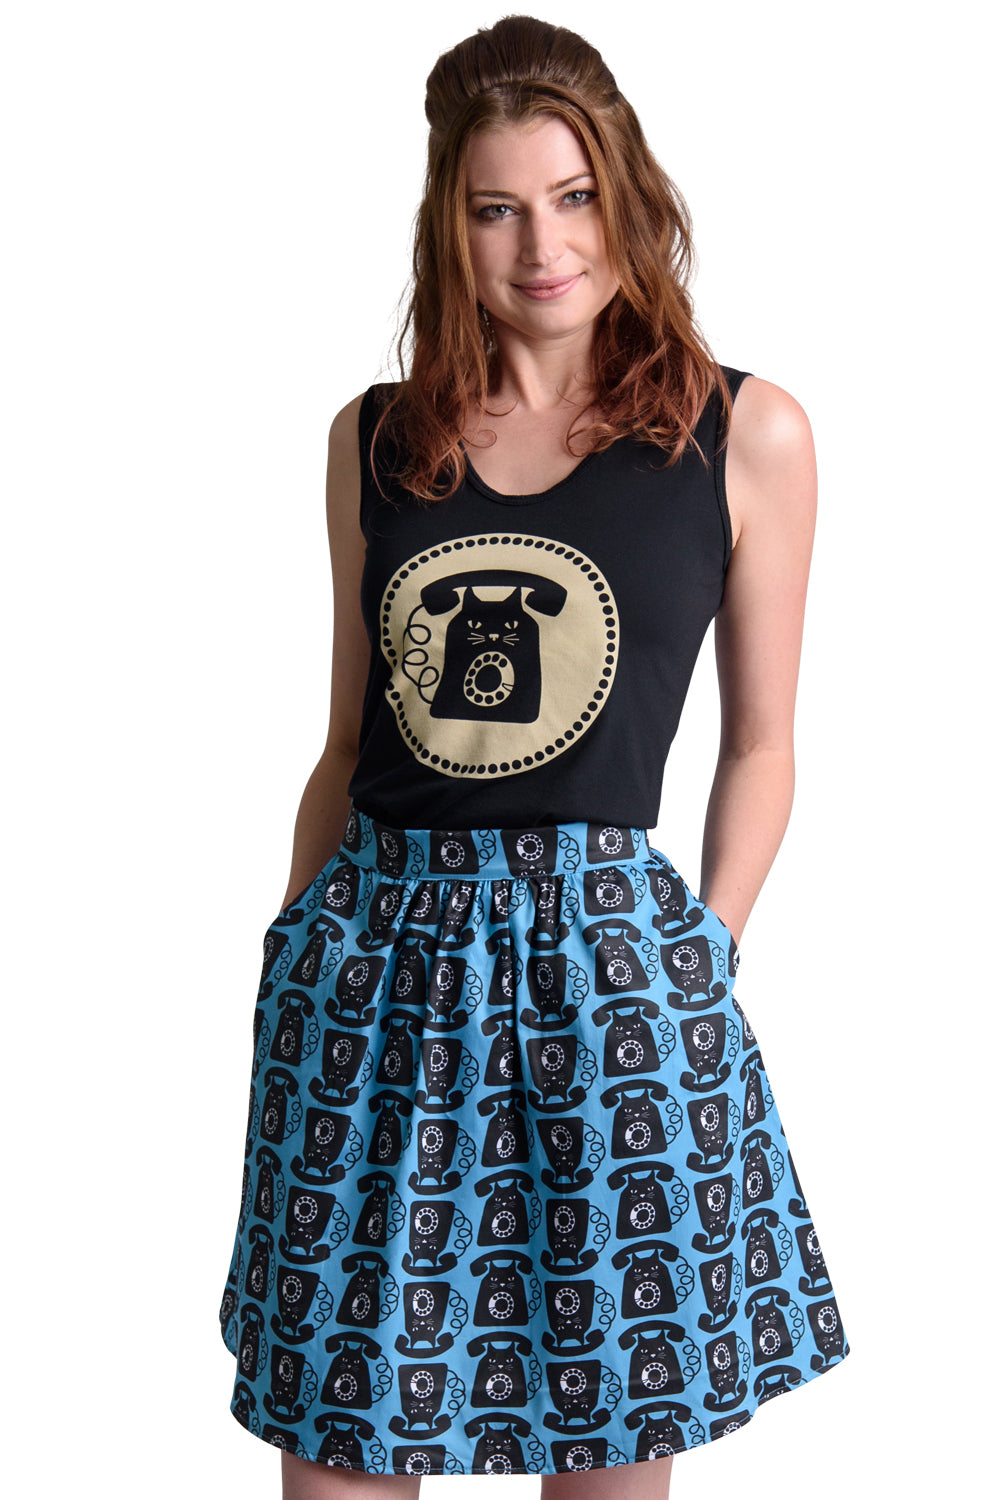 Aqua blue black and white gathered cat phone print short skirt with pockets, paired with a cute shirt